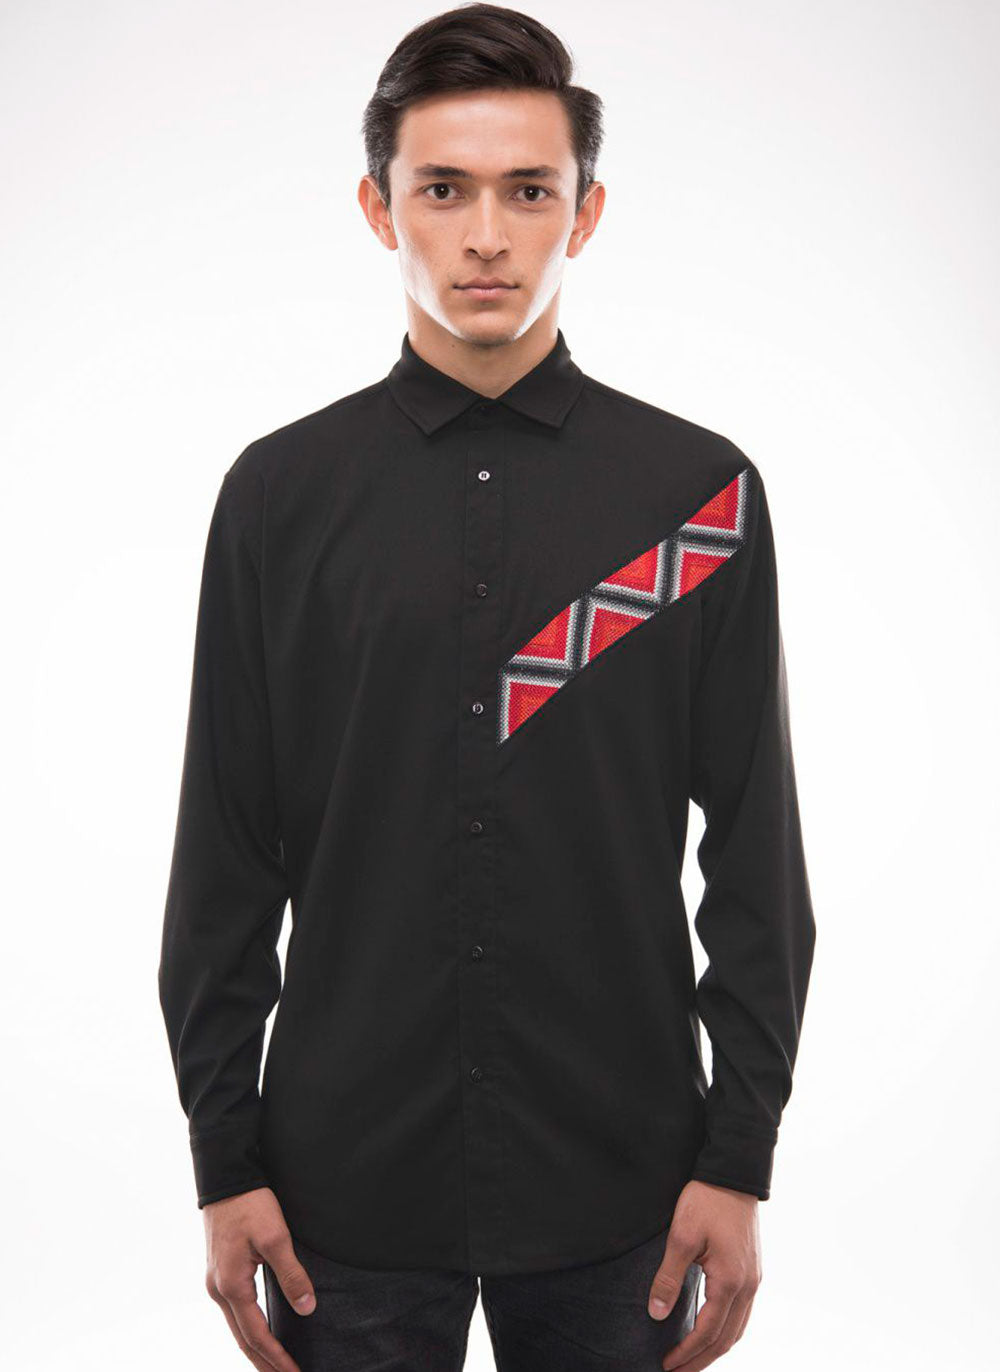 Embroidered Red&Black shirt of MAKI HOMMES